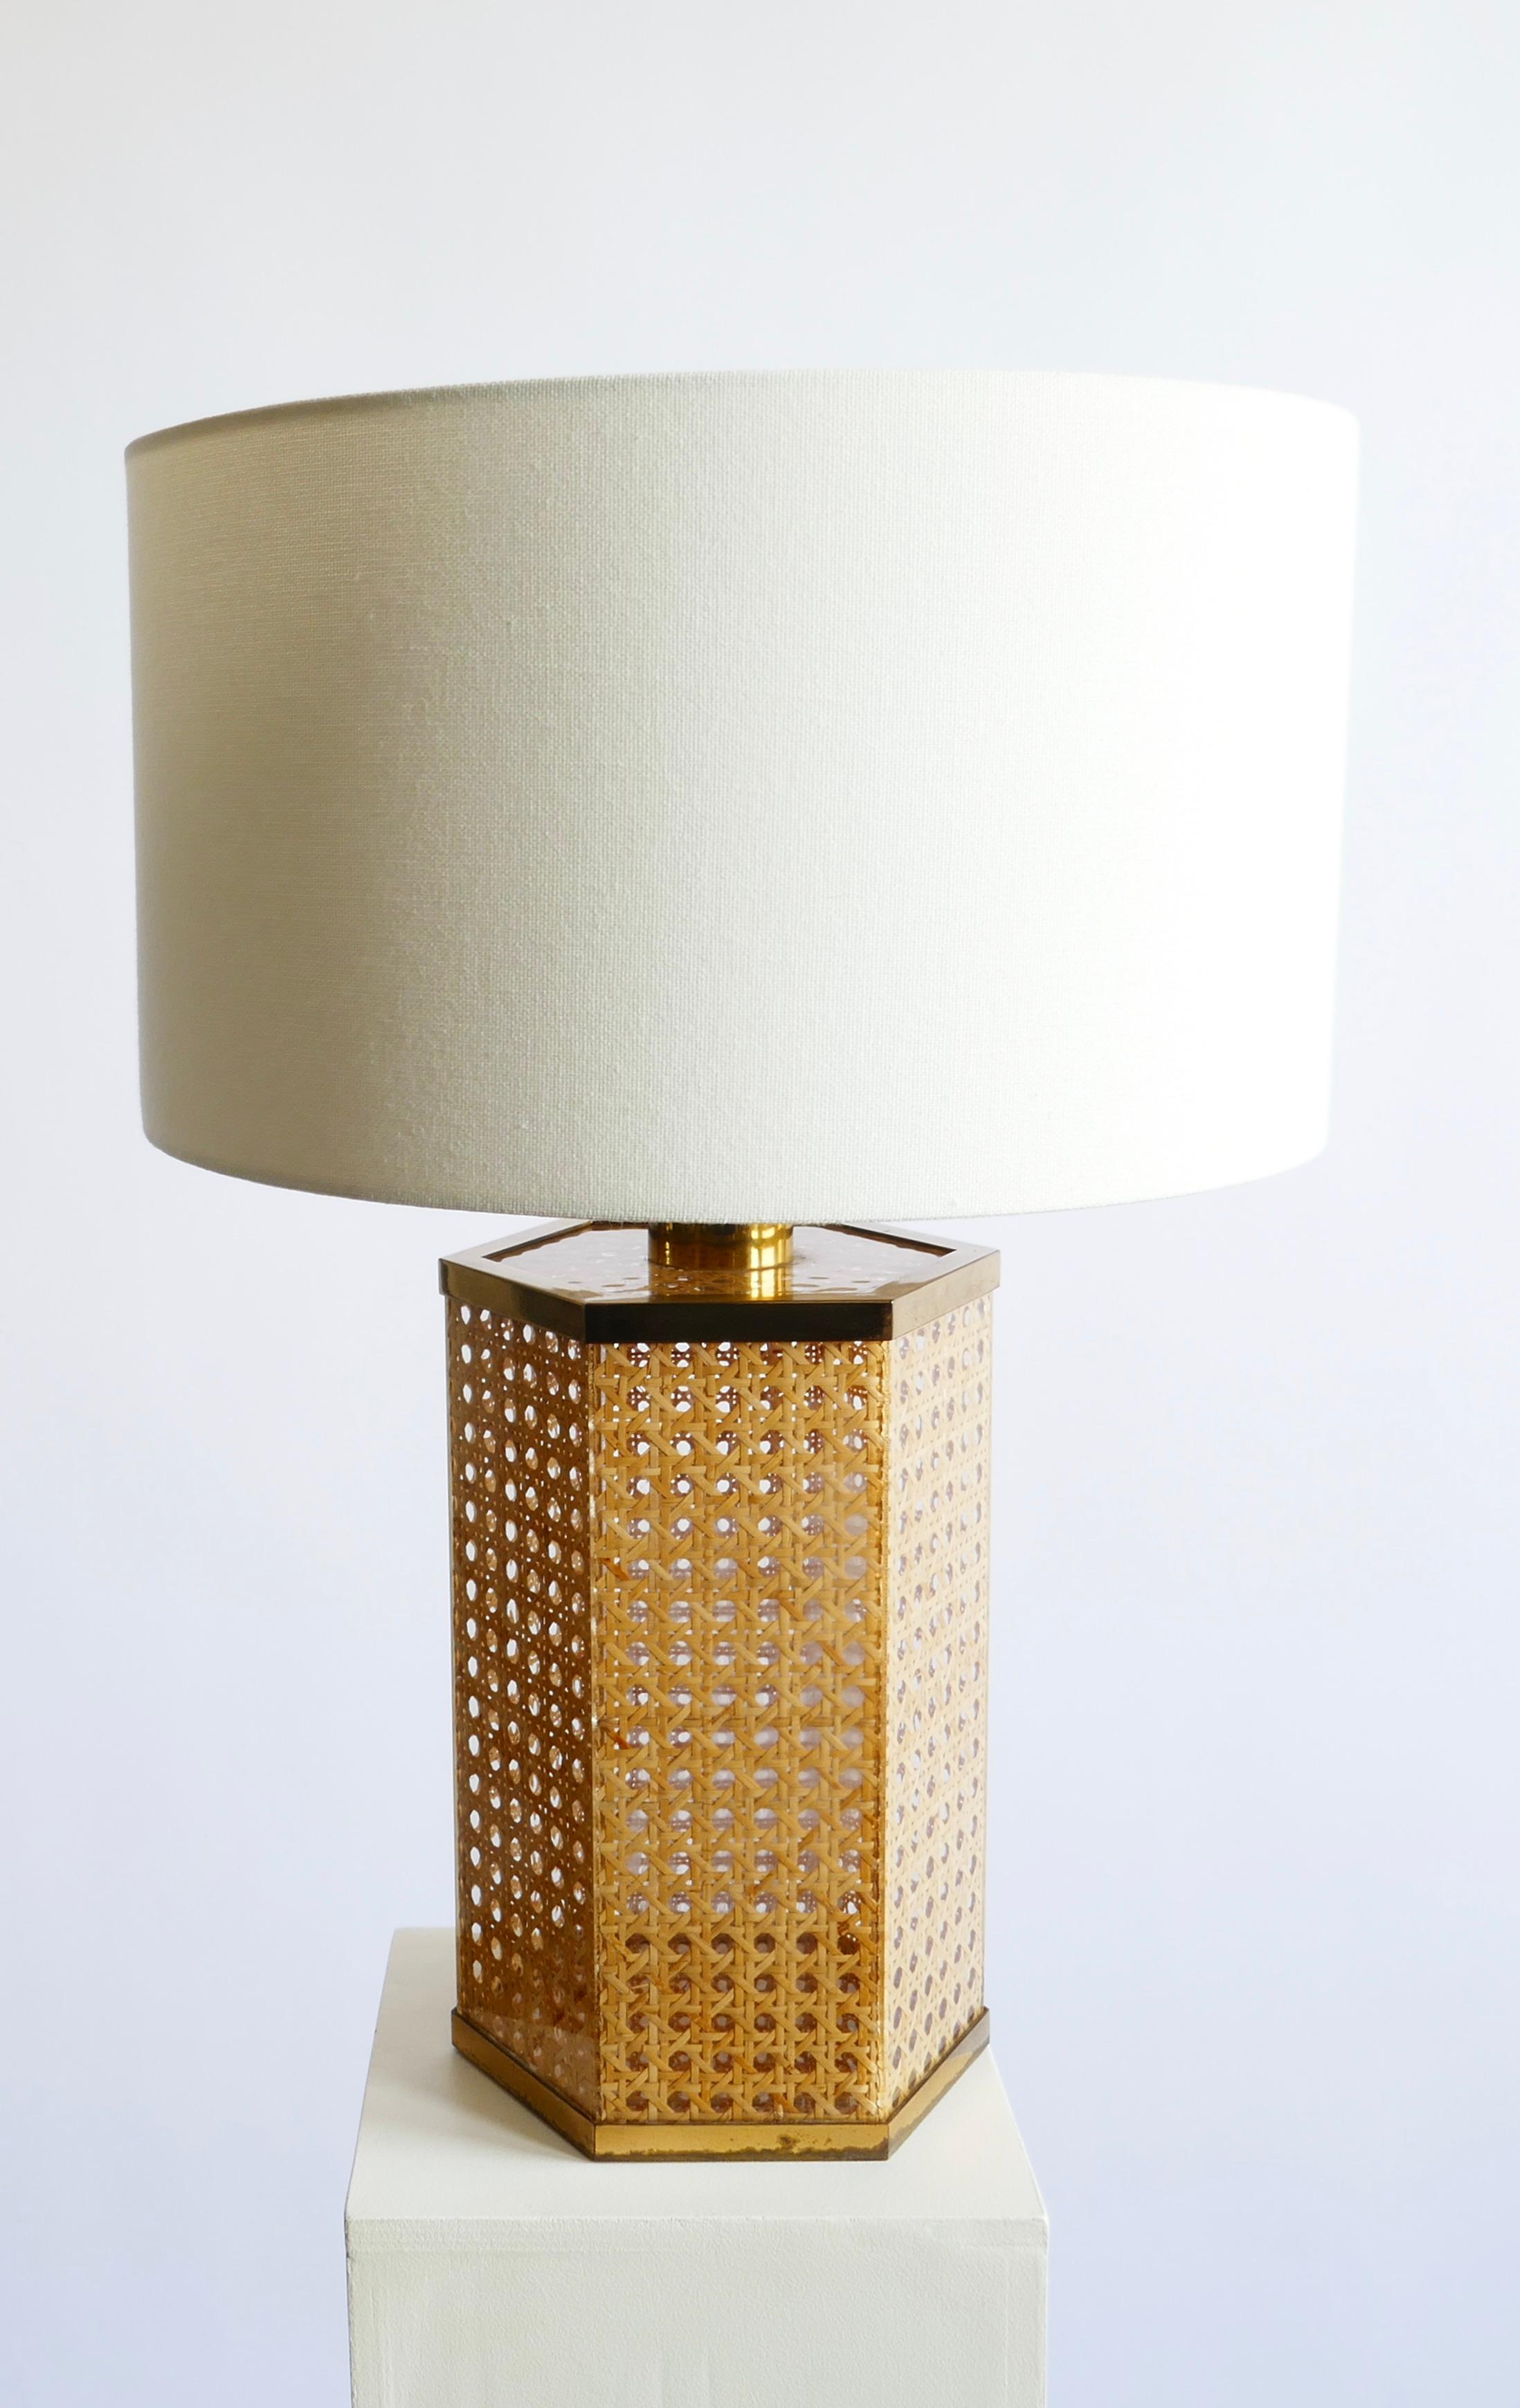 An Hexagonal base table lamp in Rattan and Lucite with Brass finishing, Italy 1970s
Measure: H 26cm
W 18cm
D 15cm
H with Shade 50cm
New Lampshade.